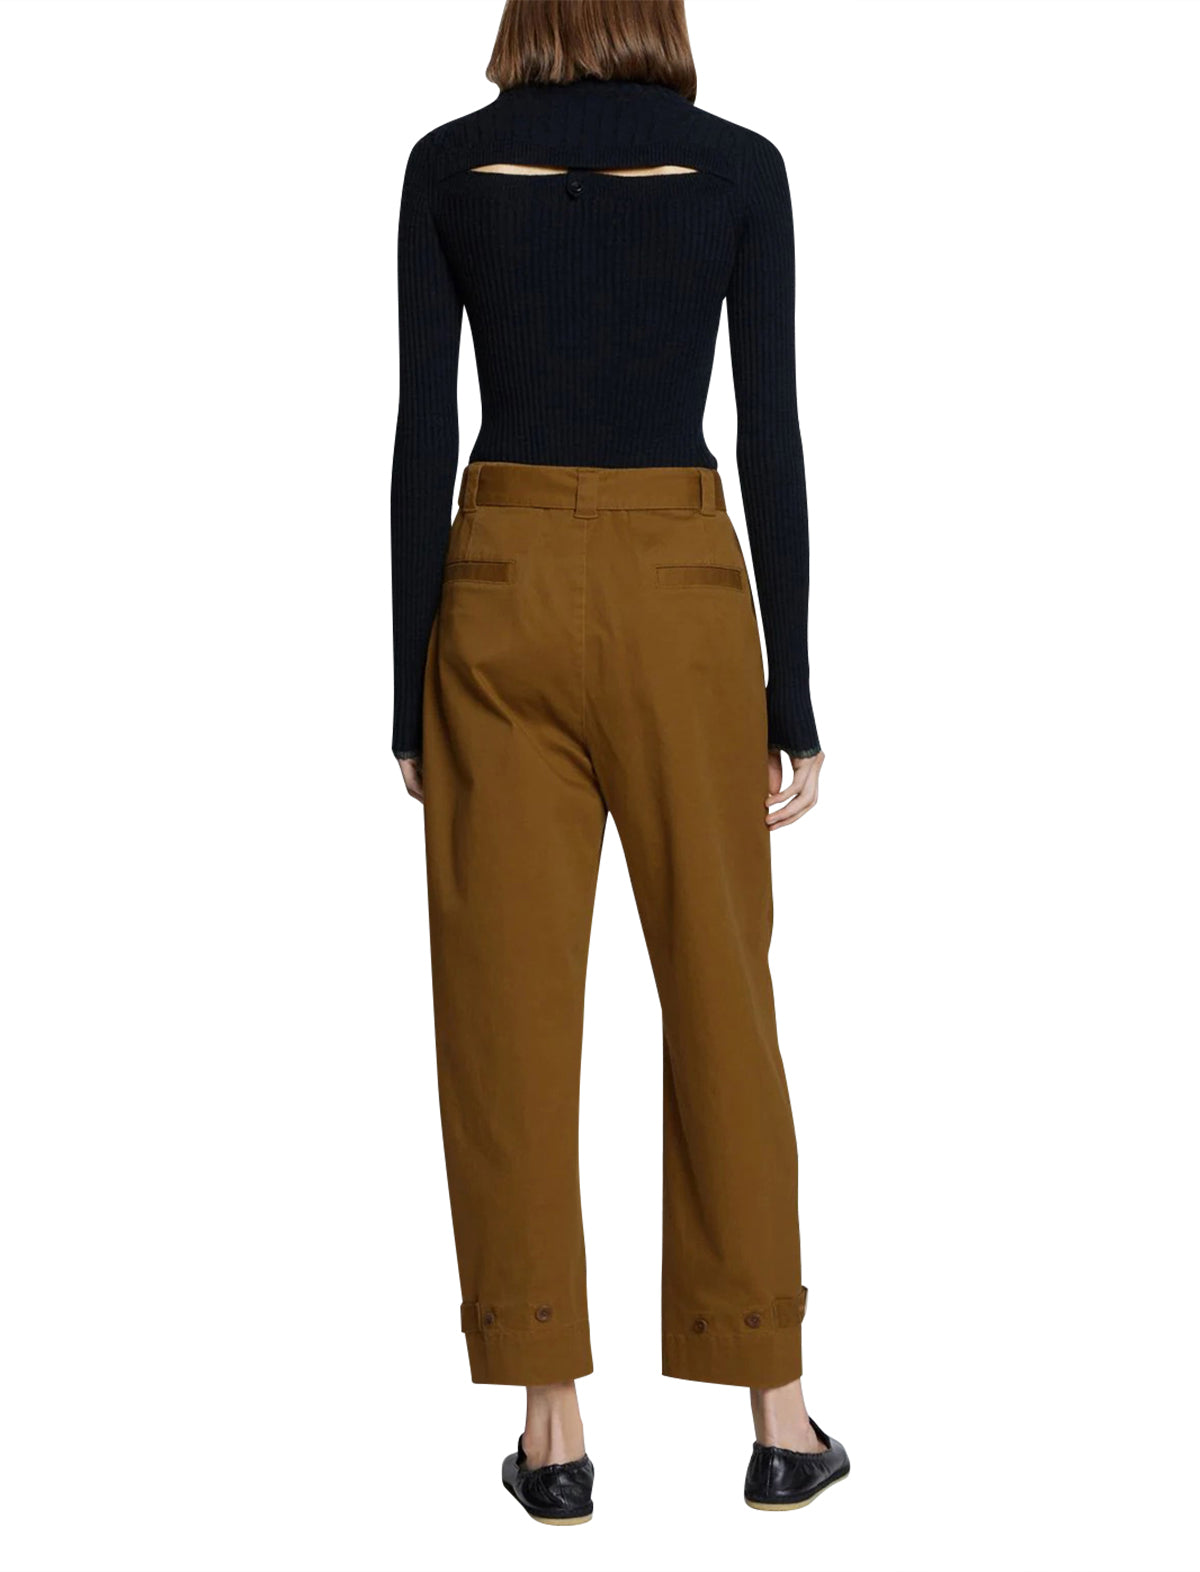 PROENZA SCHOULER WHITE LABEL Cotton Twill Tapered Pants Olive